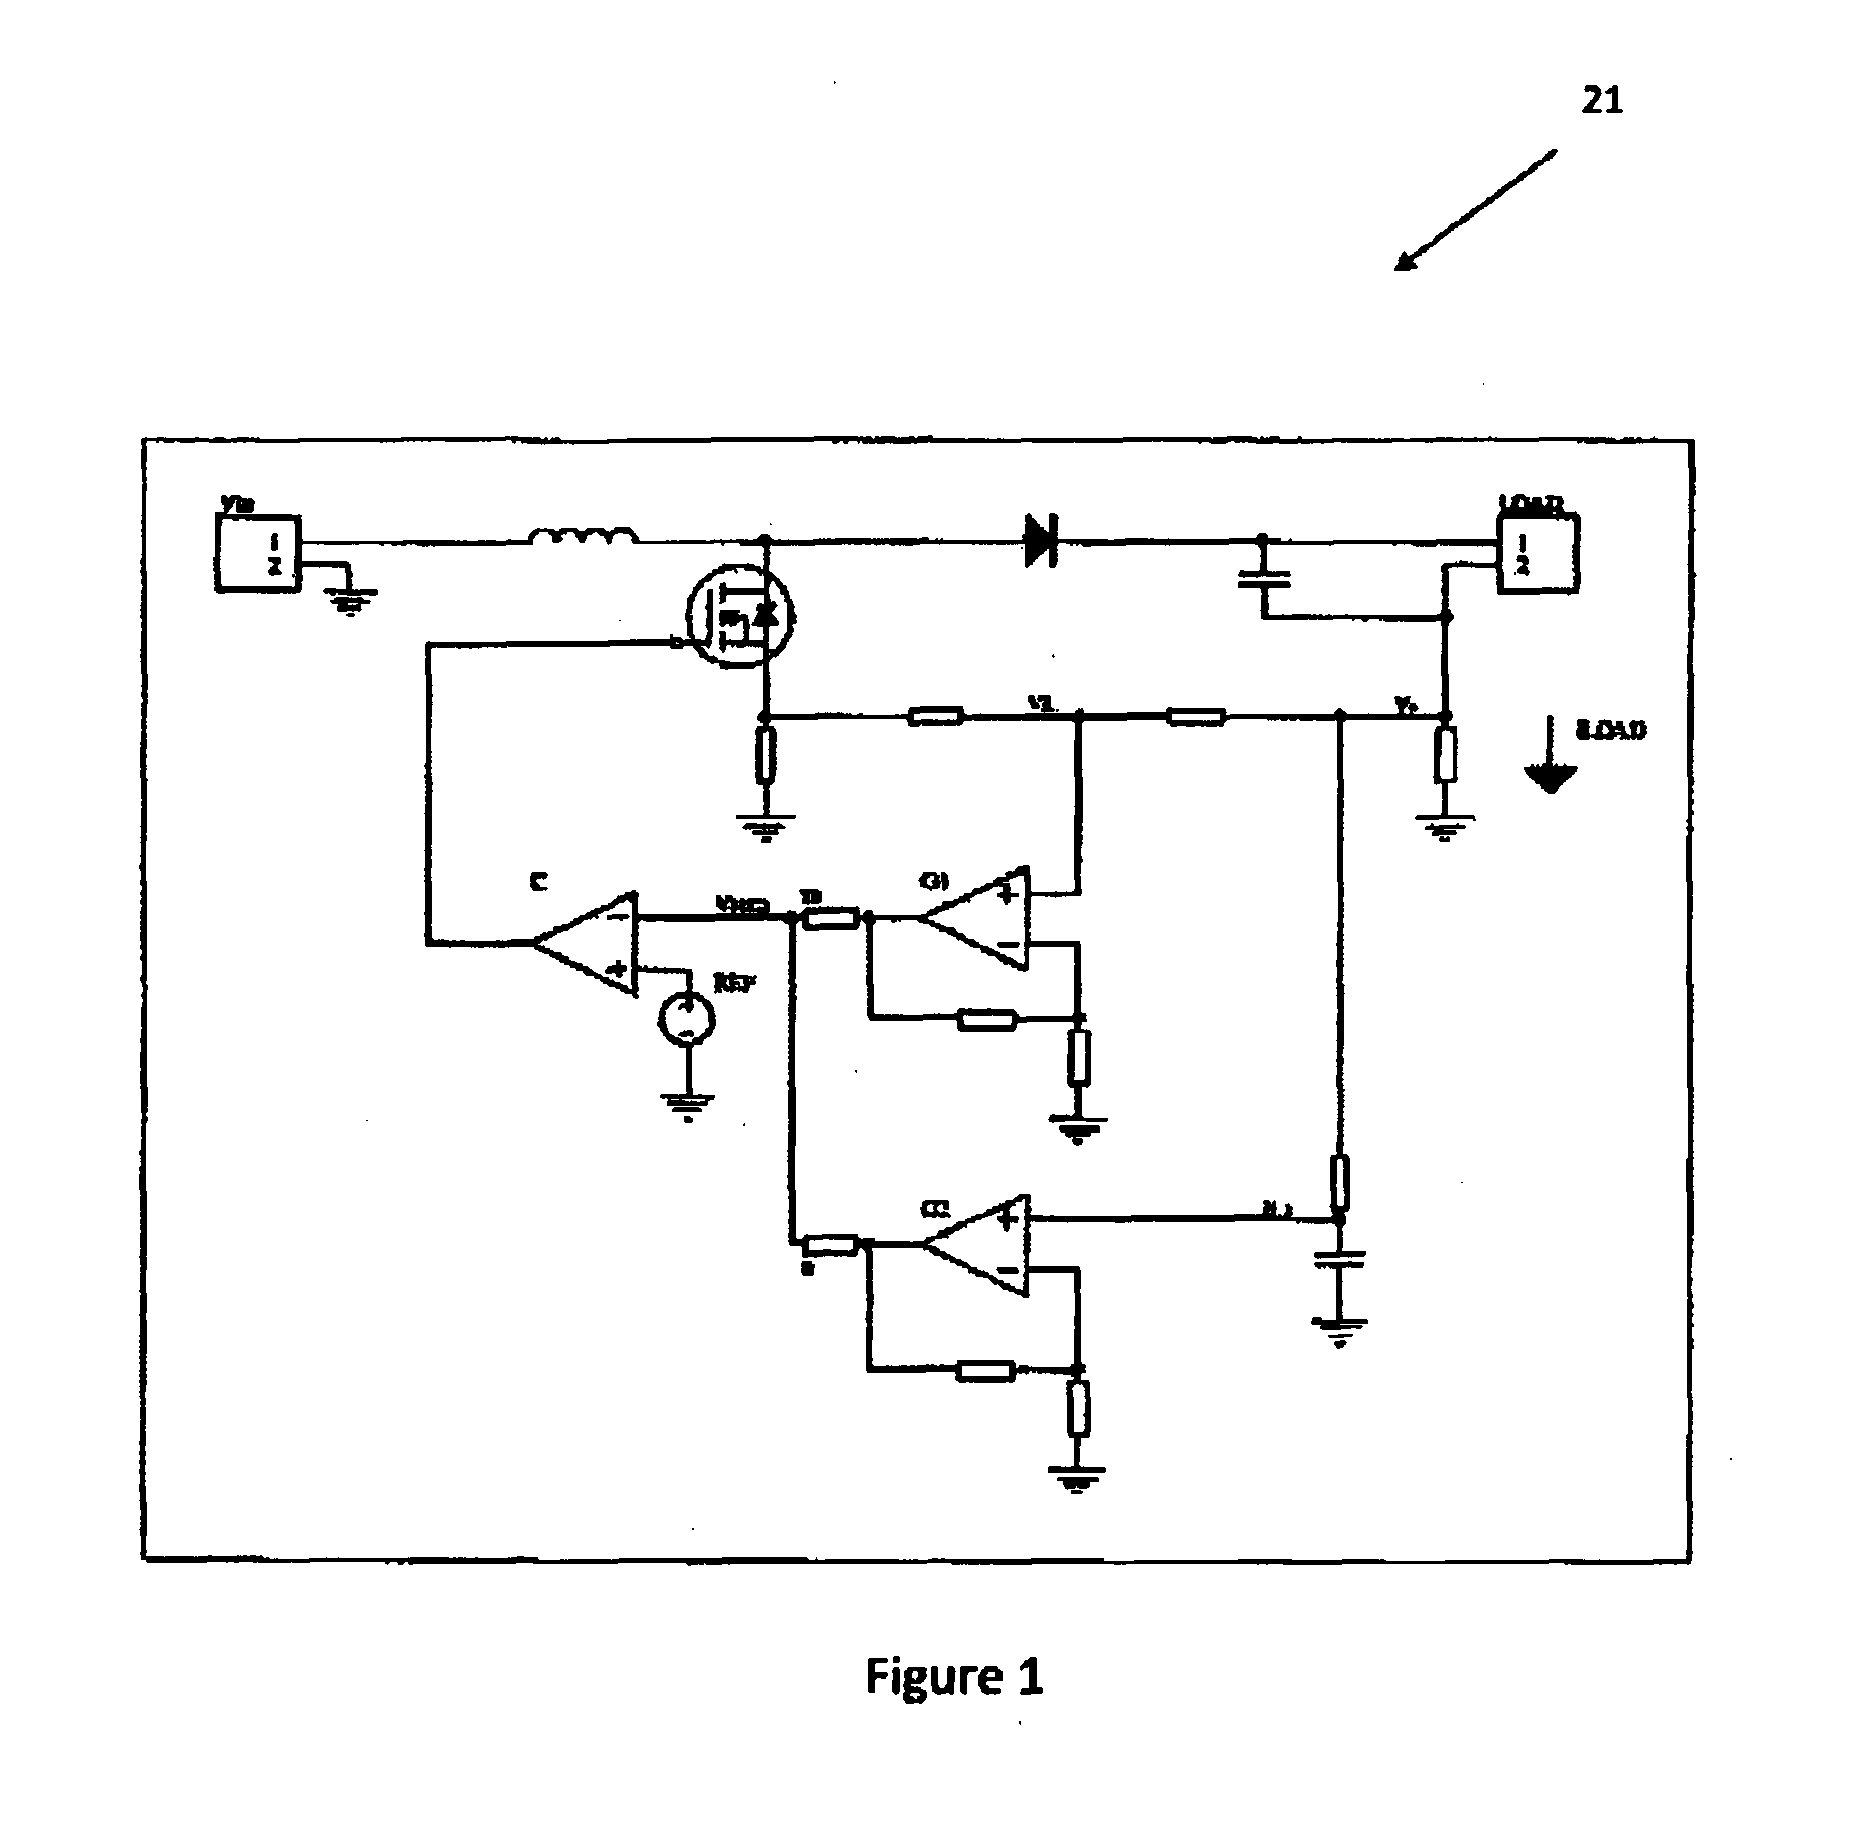 Power supply control system and device